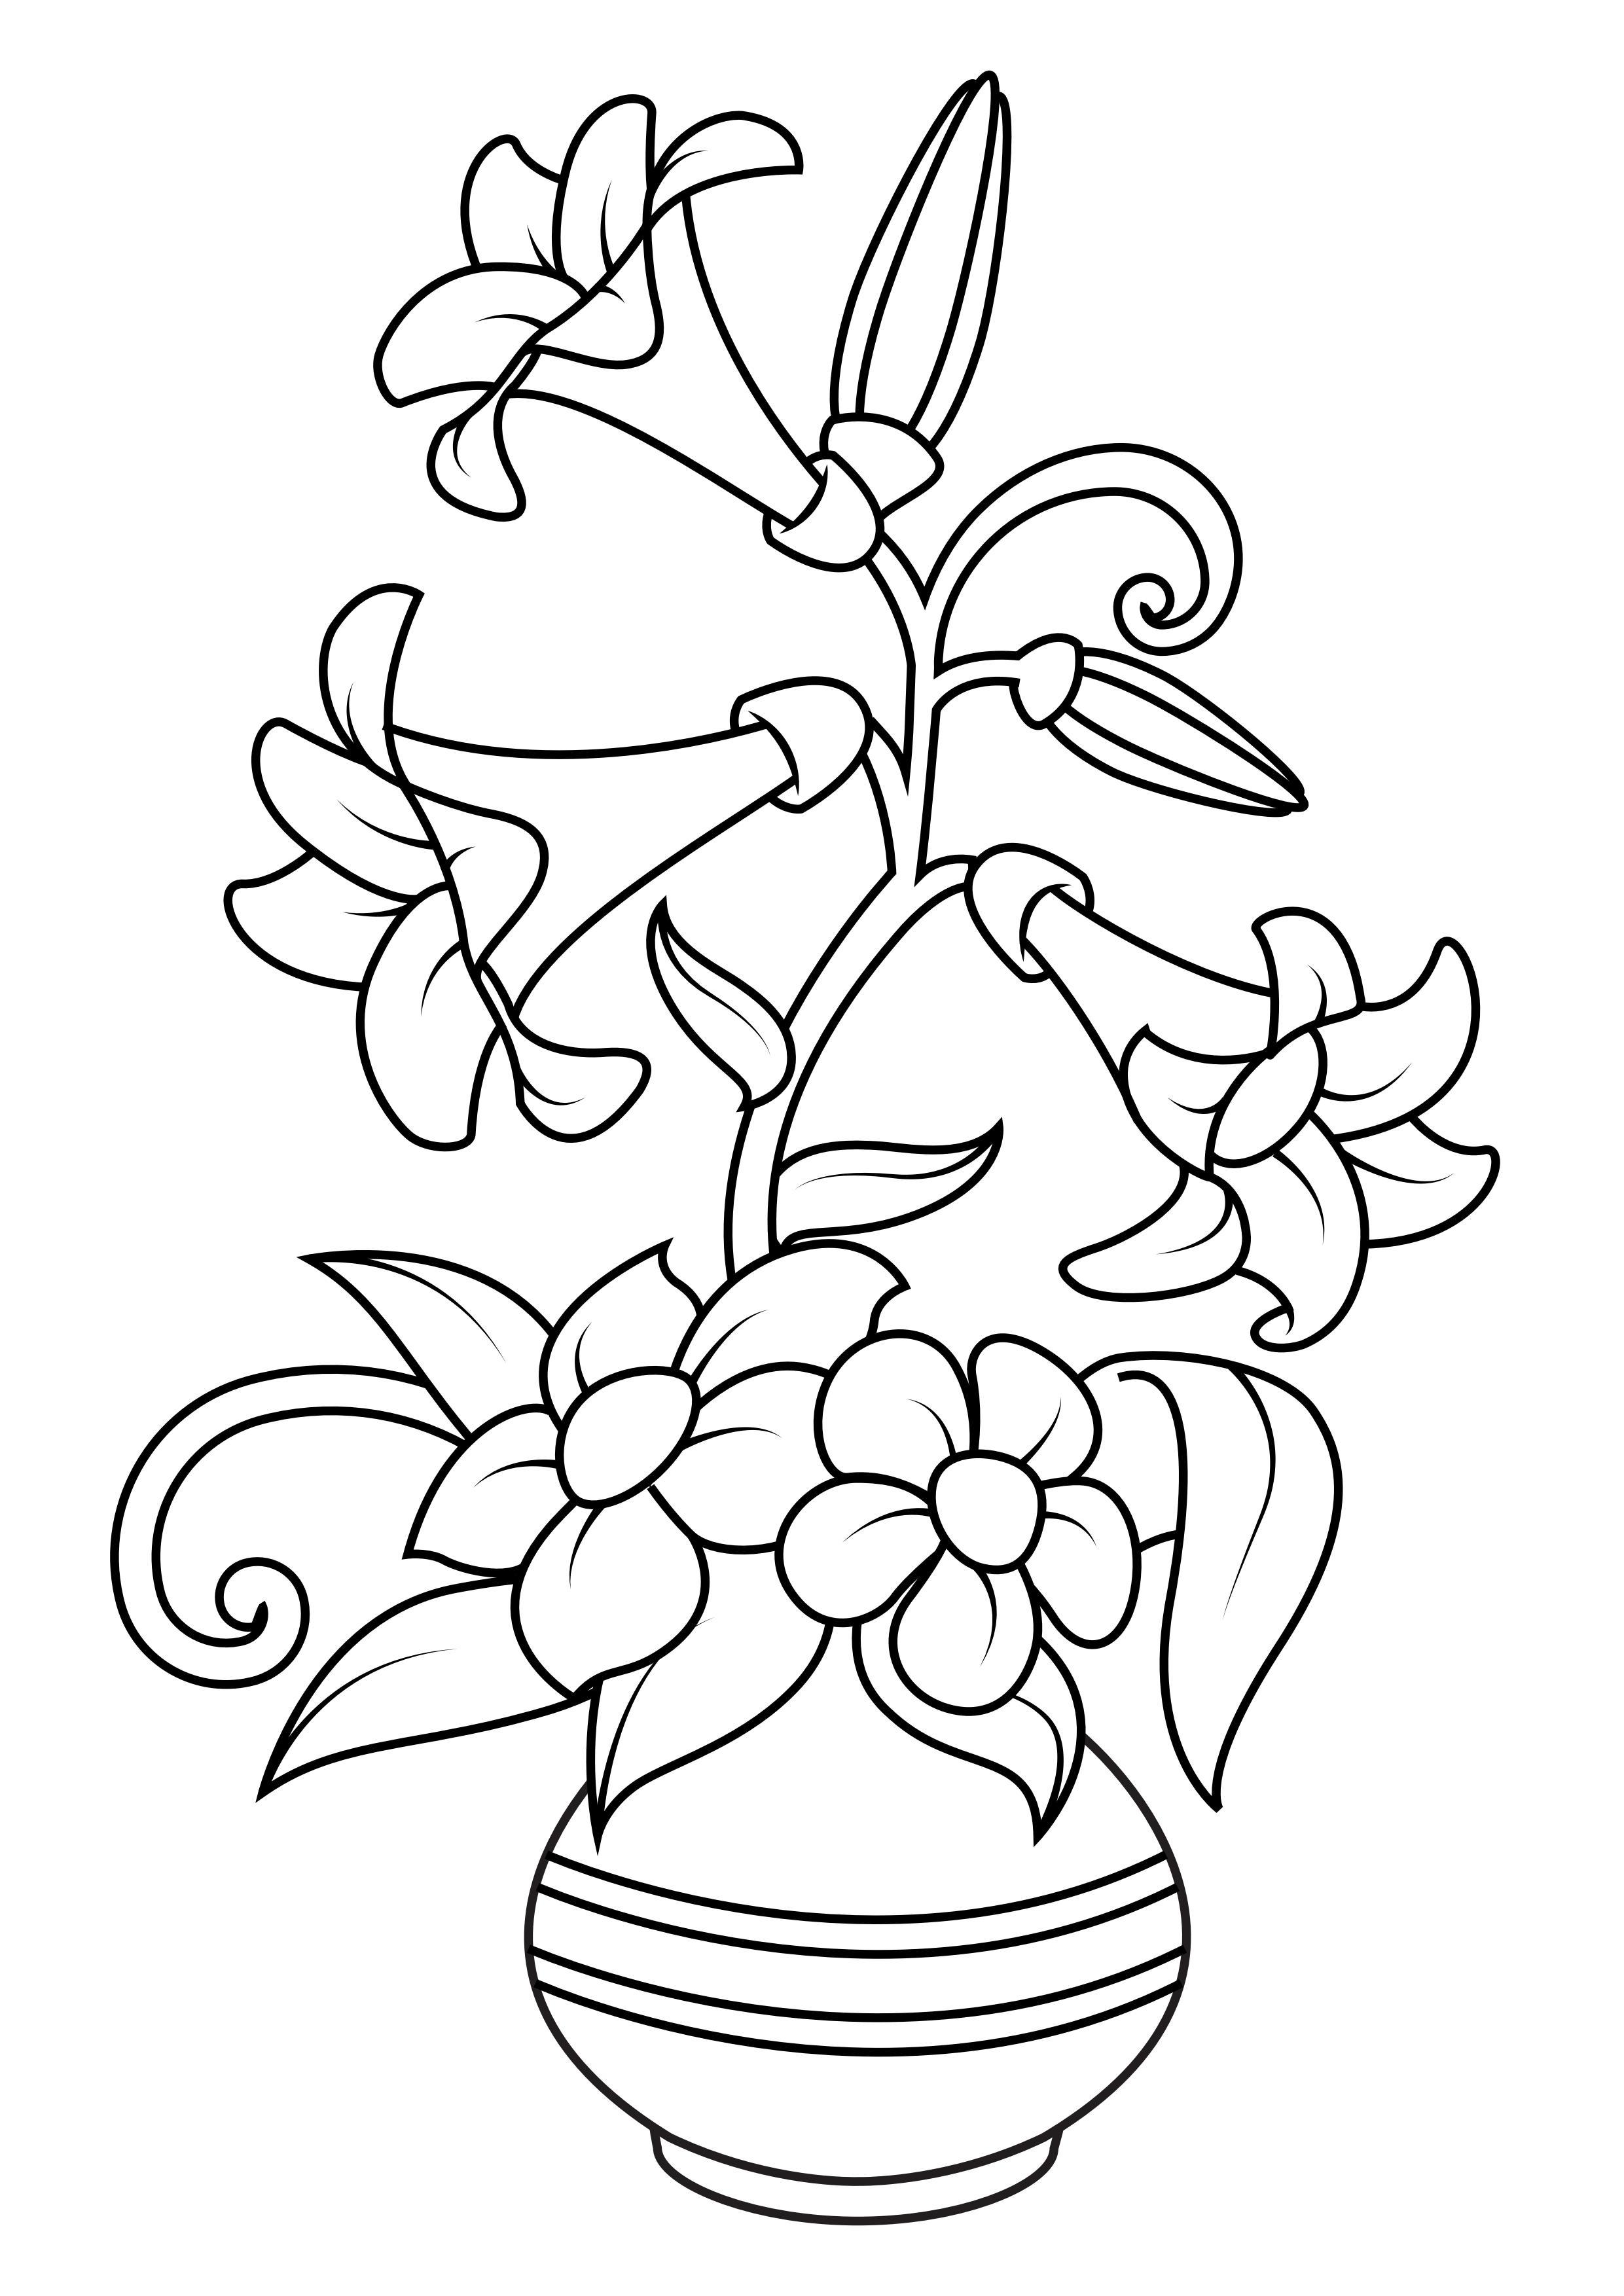 Coloring page flowers in vase